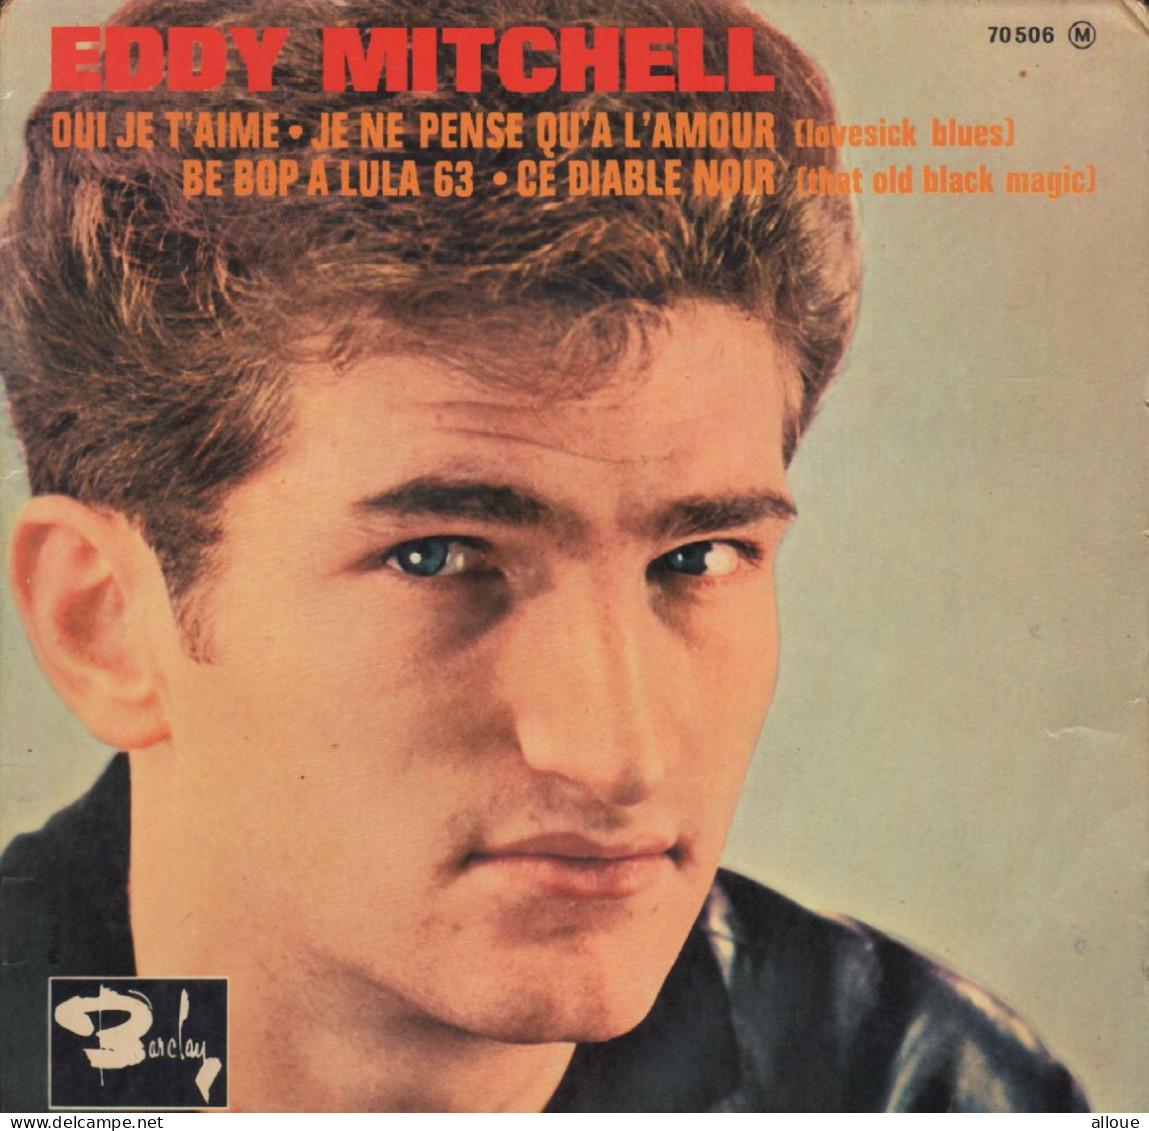 EDDY MITCHELL FR EP OUI JE T'AIME - BE BOP A LULA 63 + 2 - Other - French Music